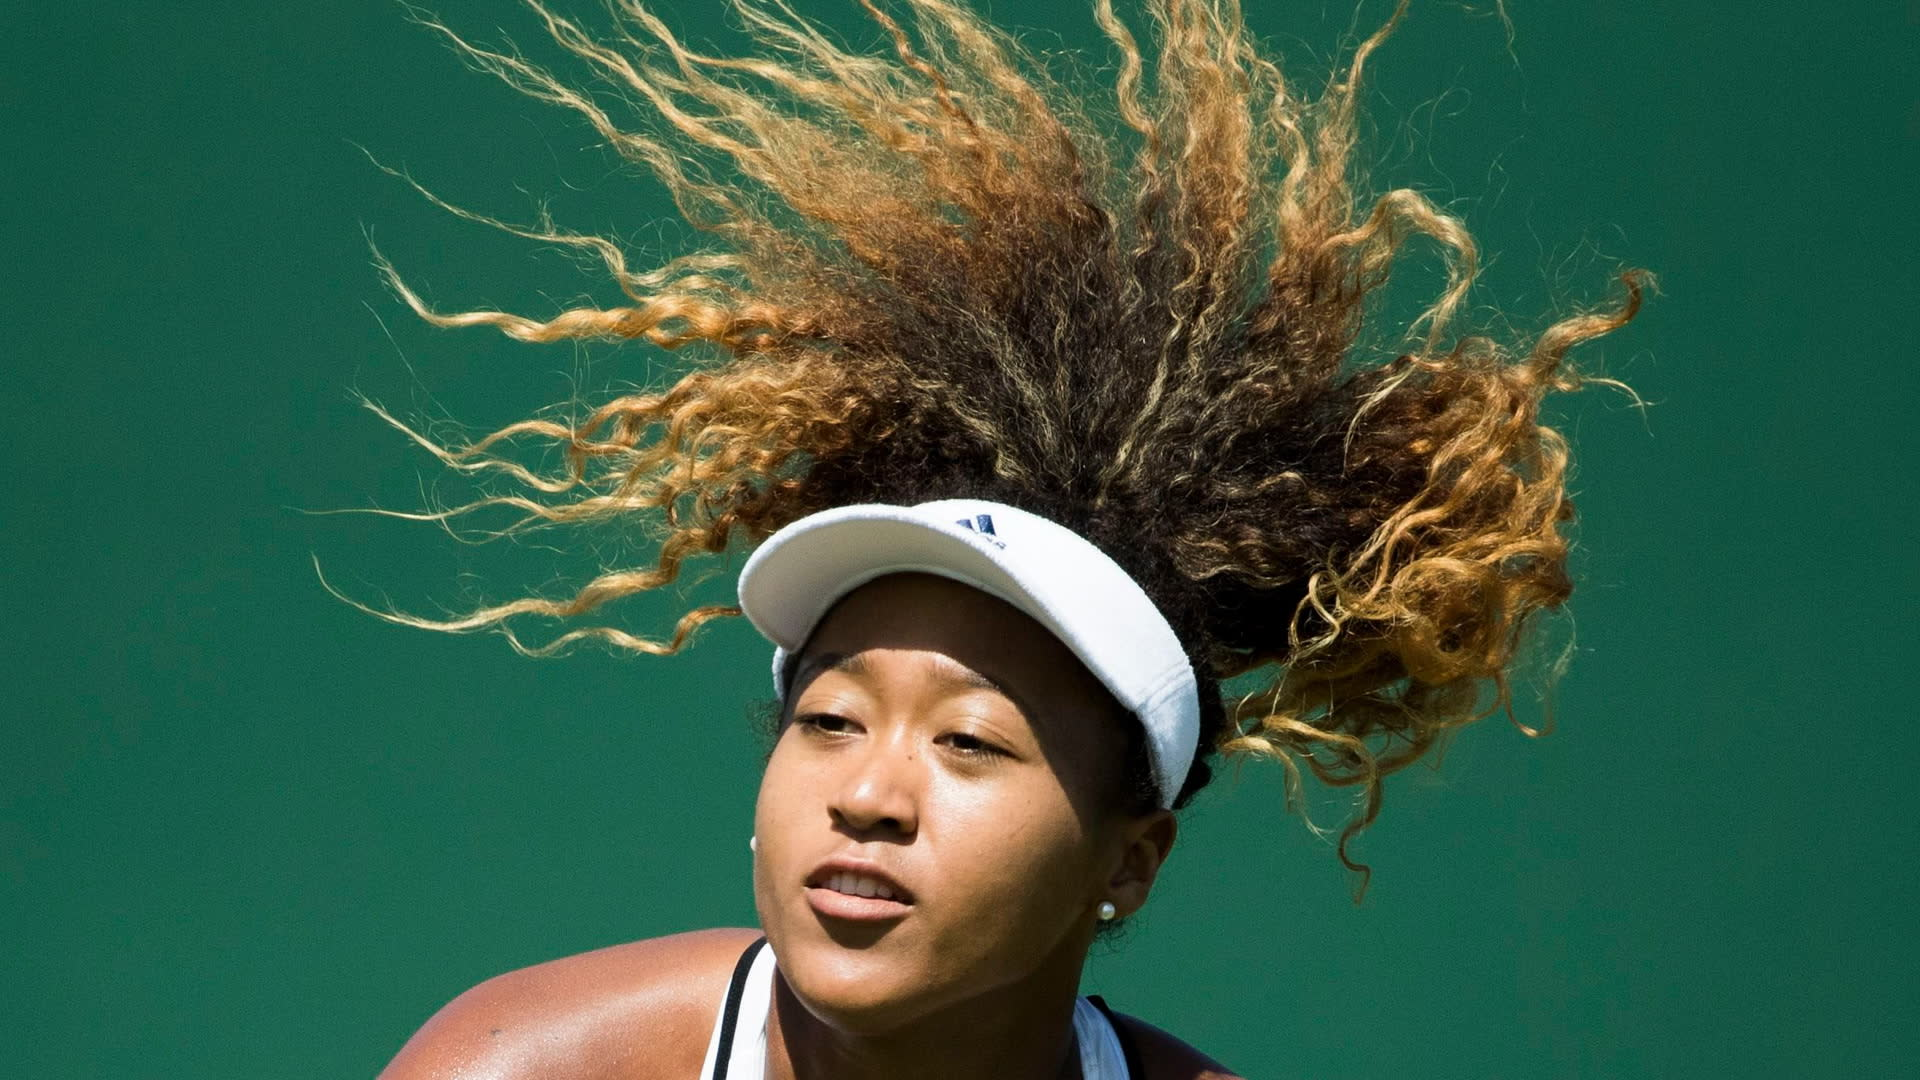 Tennis Champion Naomi Osaka's $8.5M Adidas Deal Biggest Ever for a Woman